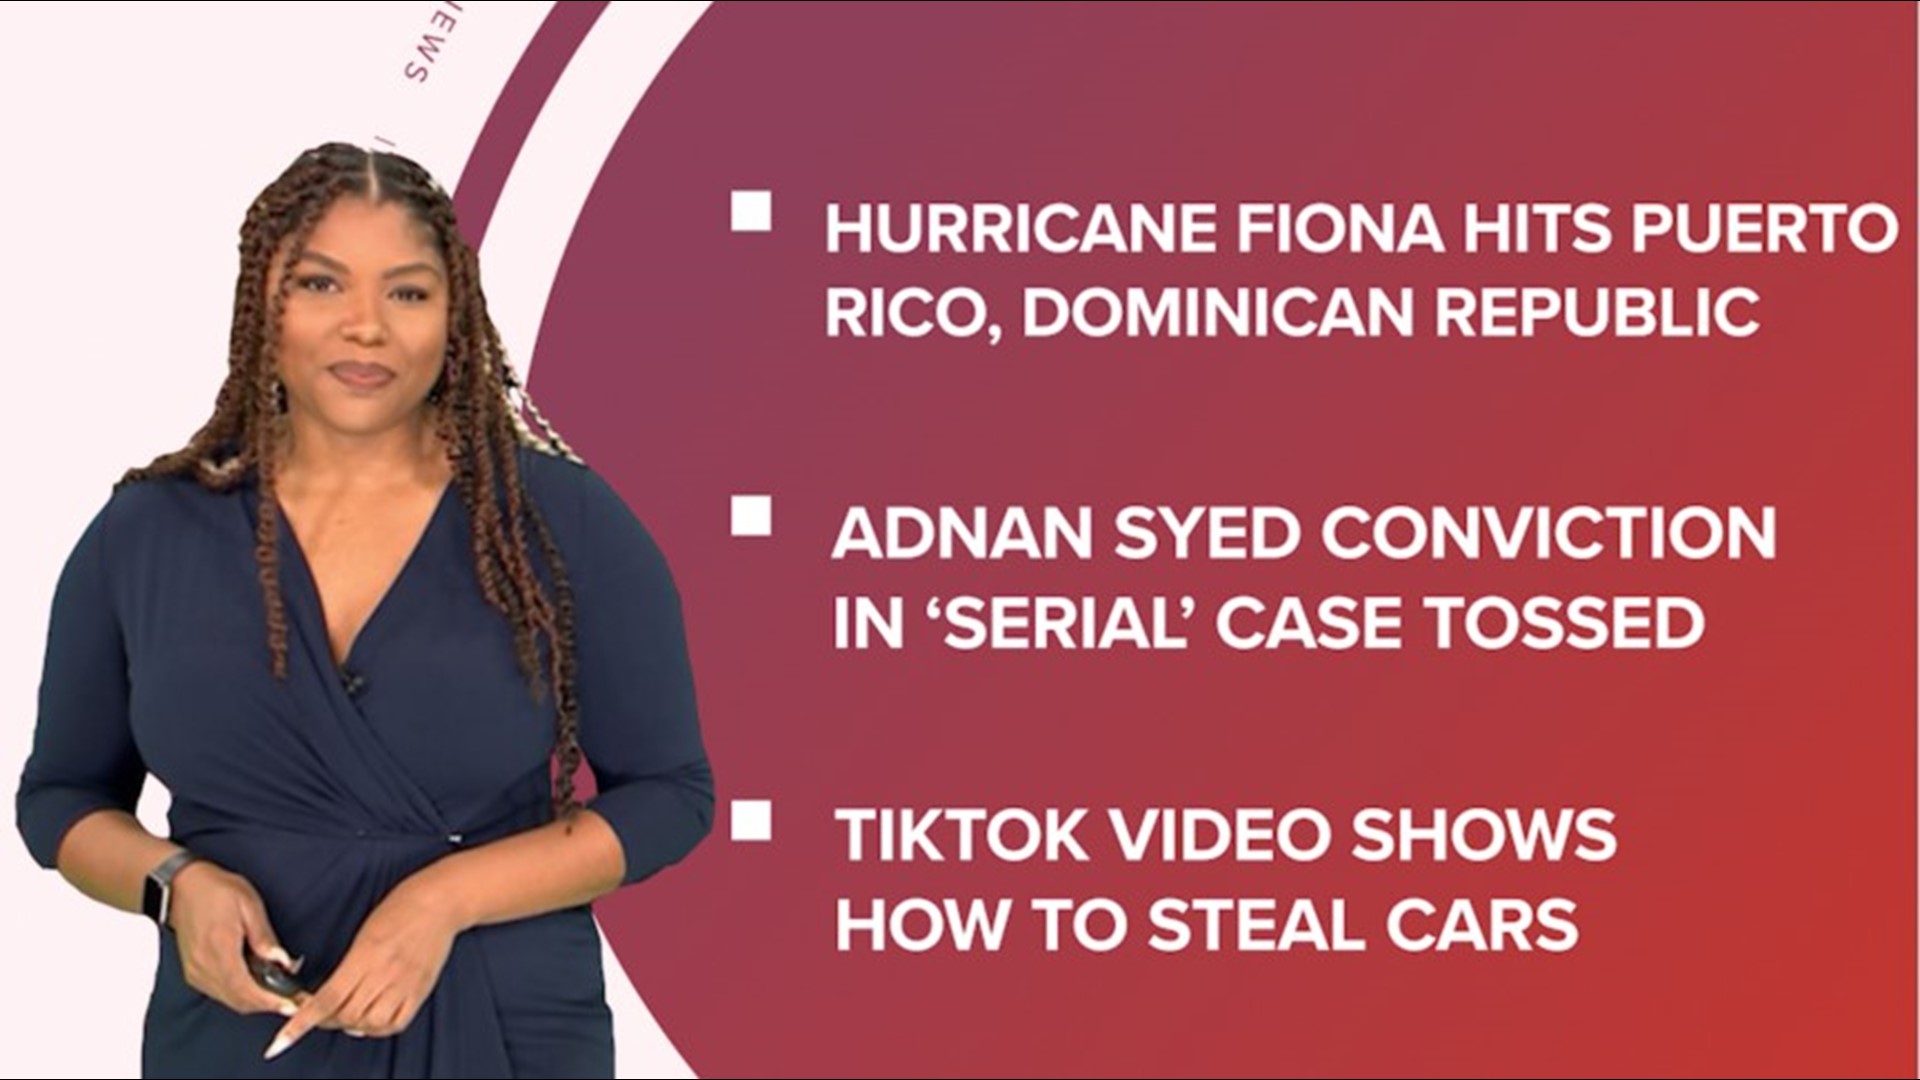 A look at what is happening in the news from Hurricane Fiona hitting Puerto Rico and the Dominican Republic to a viral Tiktok video increasing car thefts.